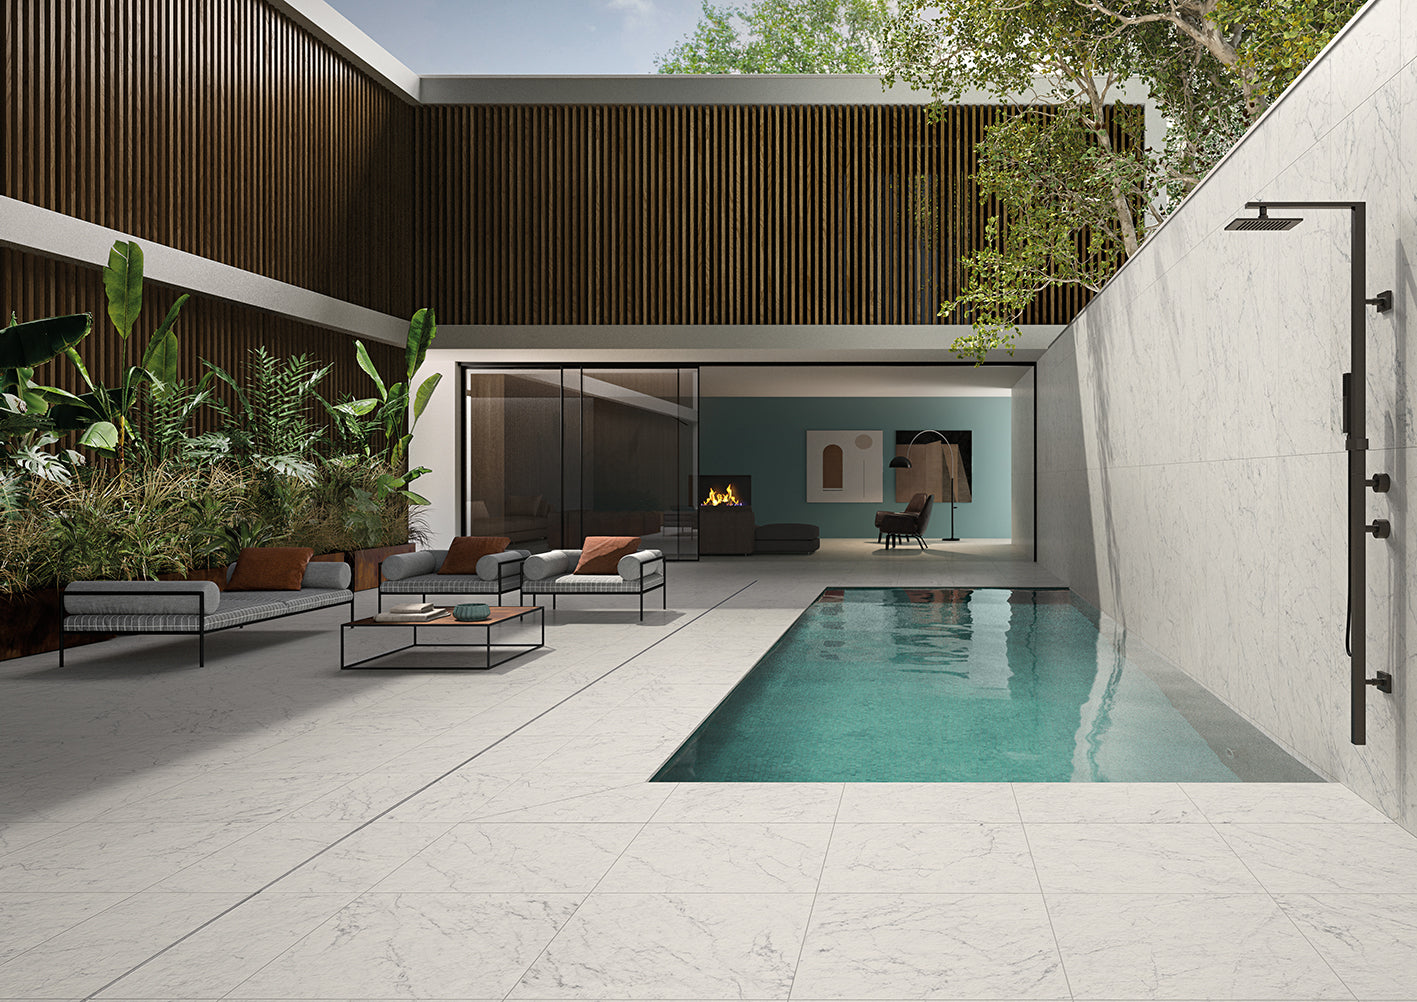 Luxurious white marble porcelain tile collection by Surface Group showcased in a modern outdoor patio setting with pool.